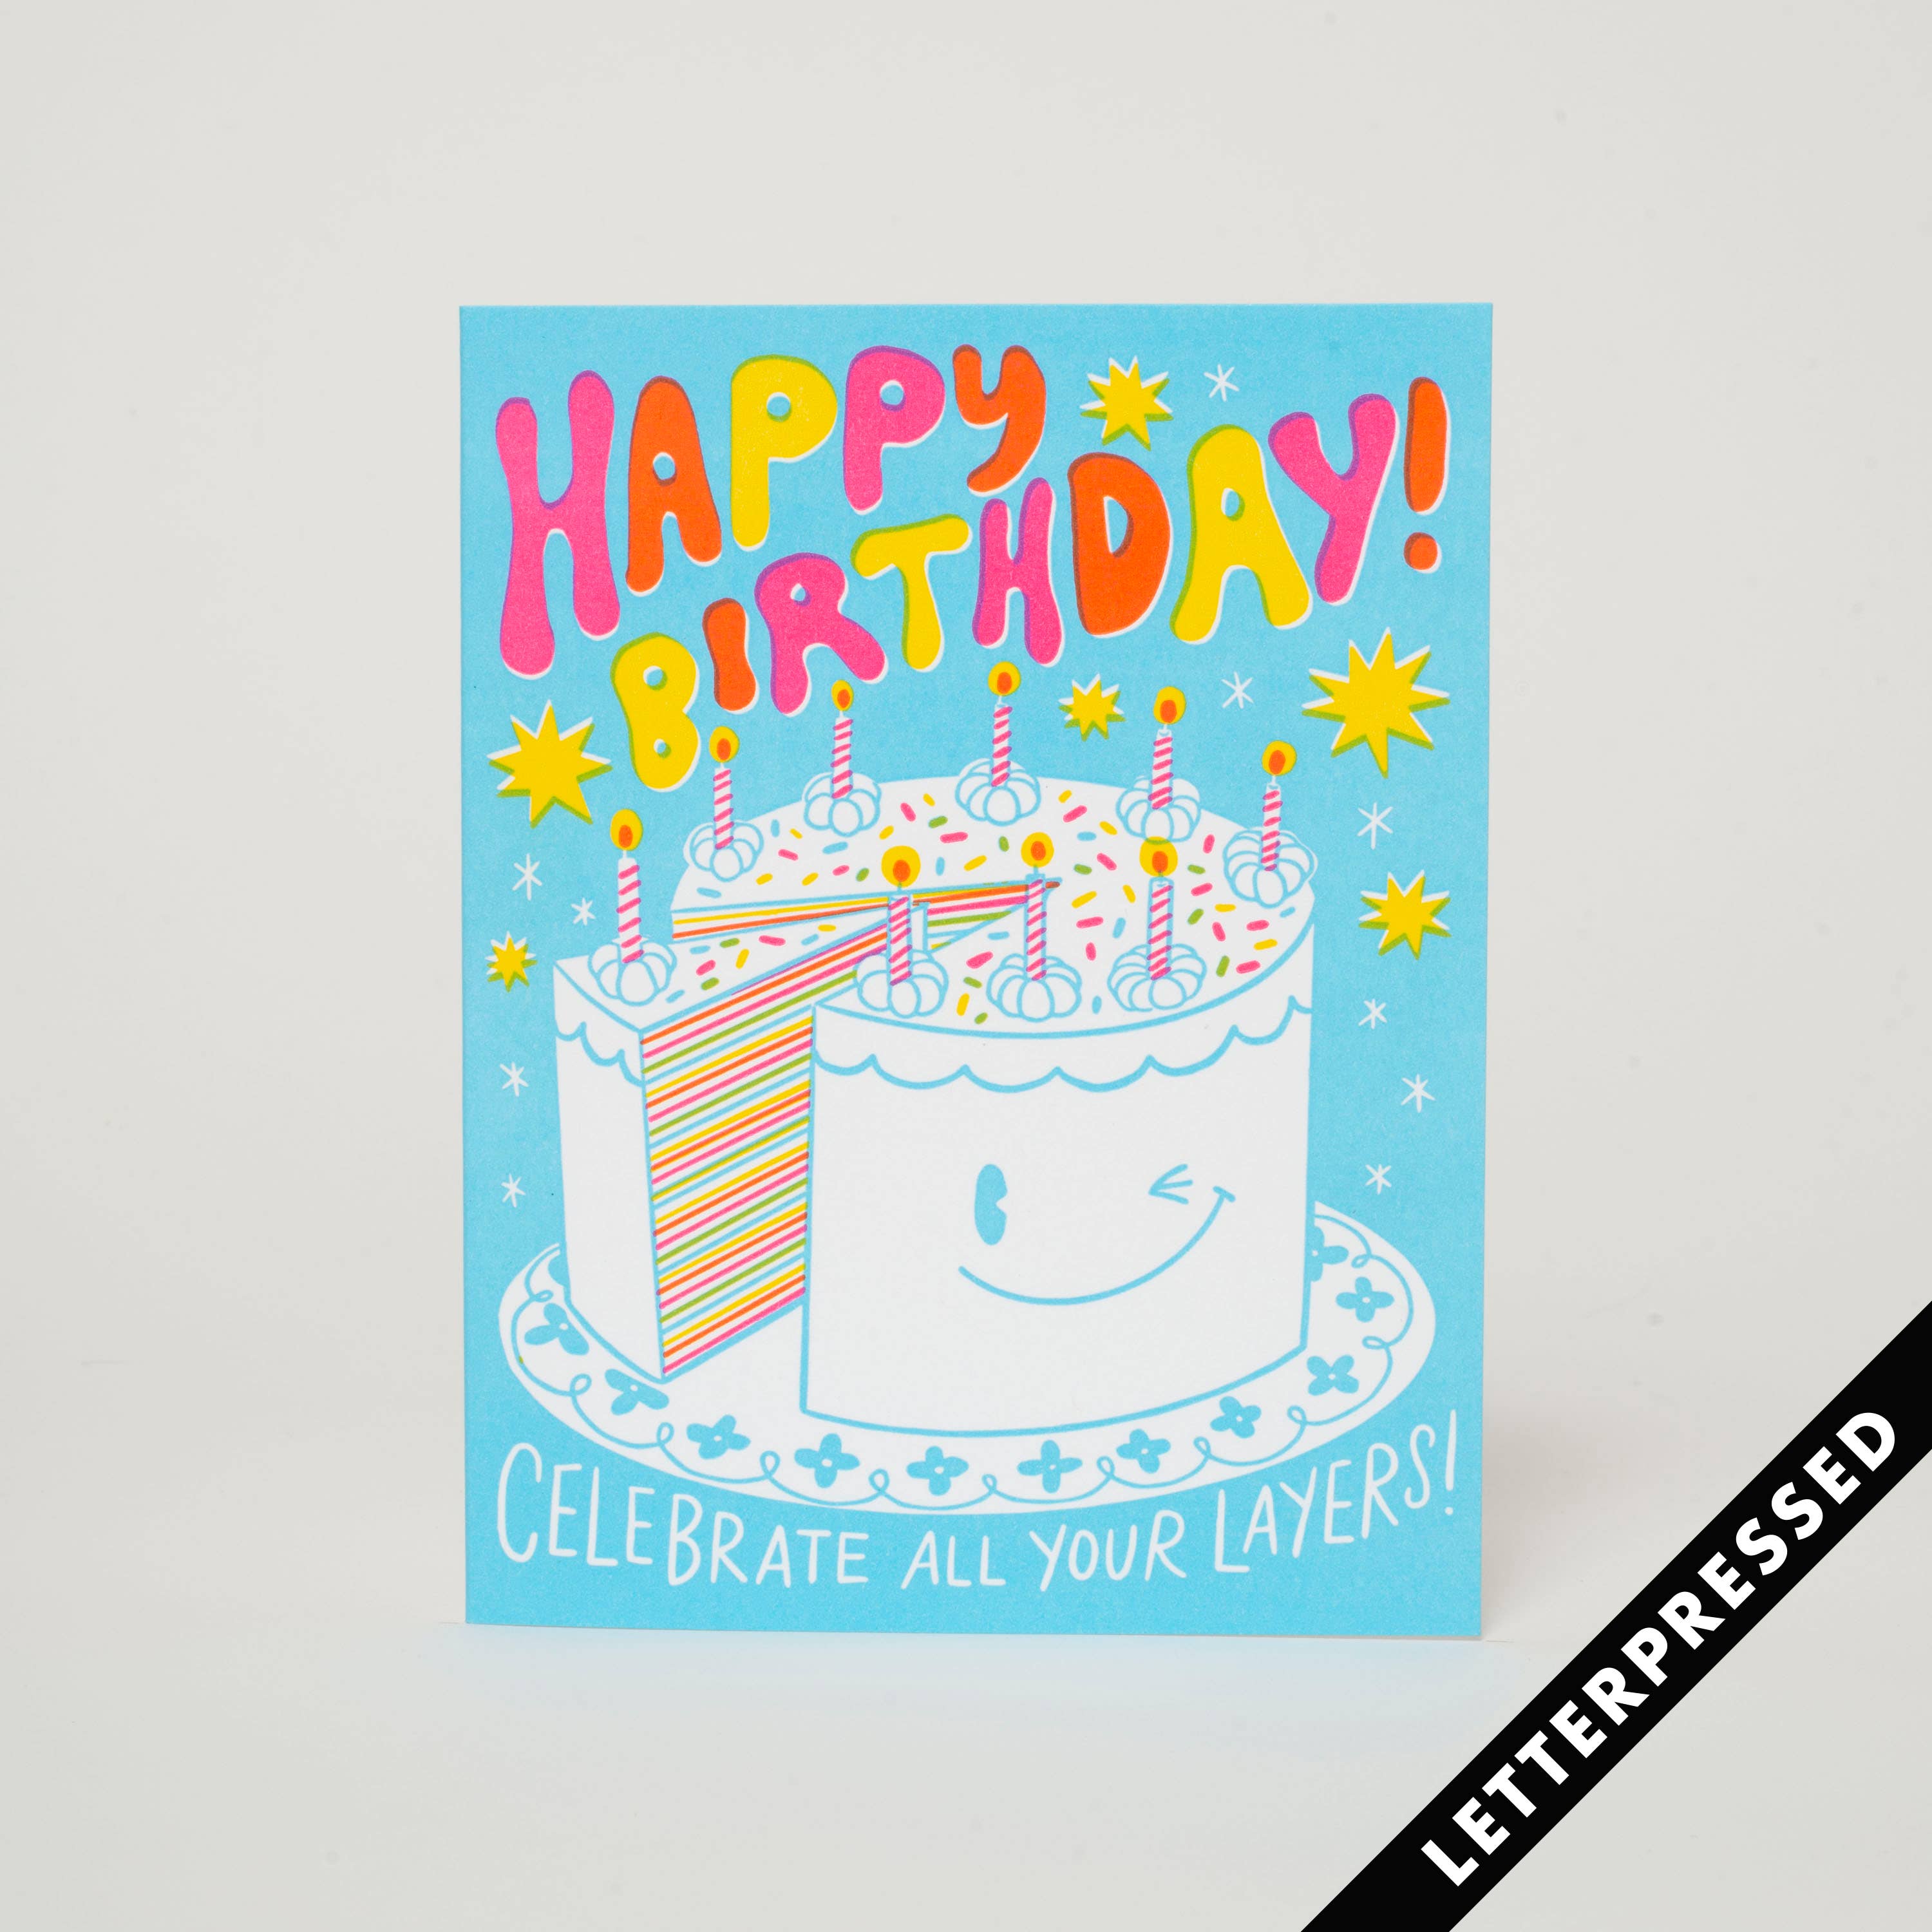 Egg Press Manufacturing - HELLO! LUCKY -- Cake Layers Birthday: Paper tab